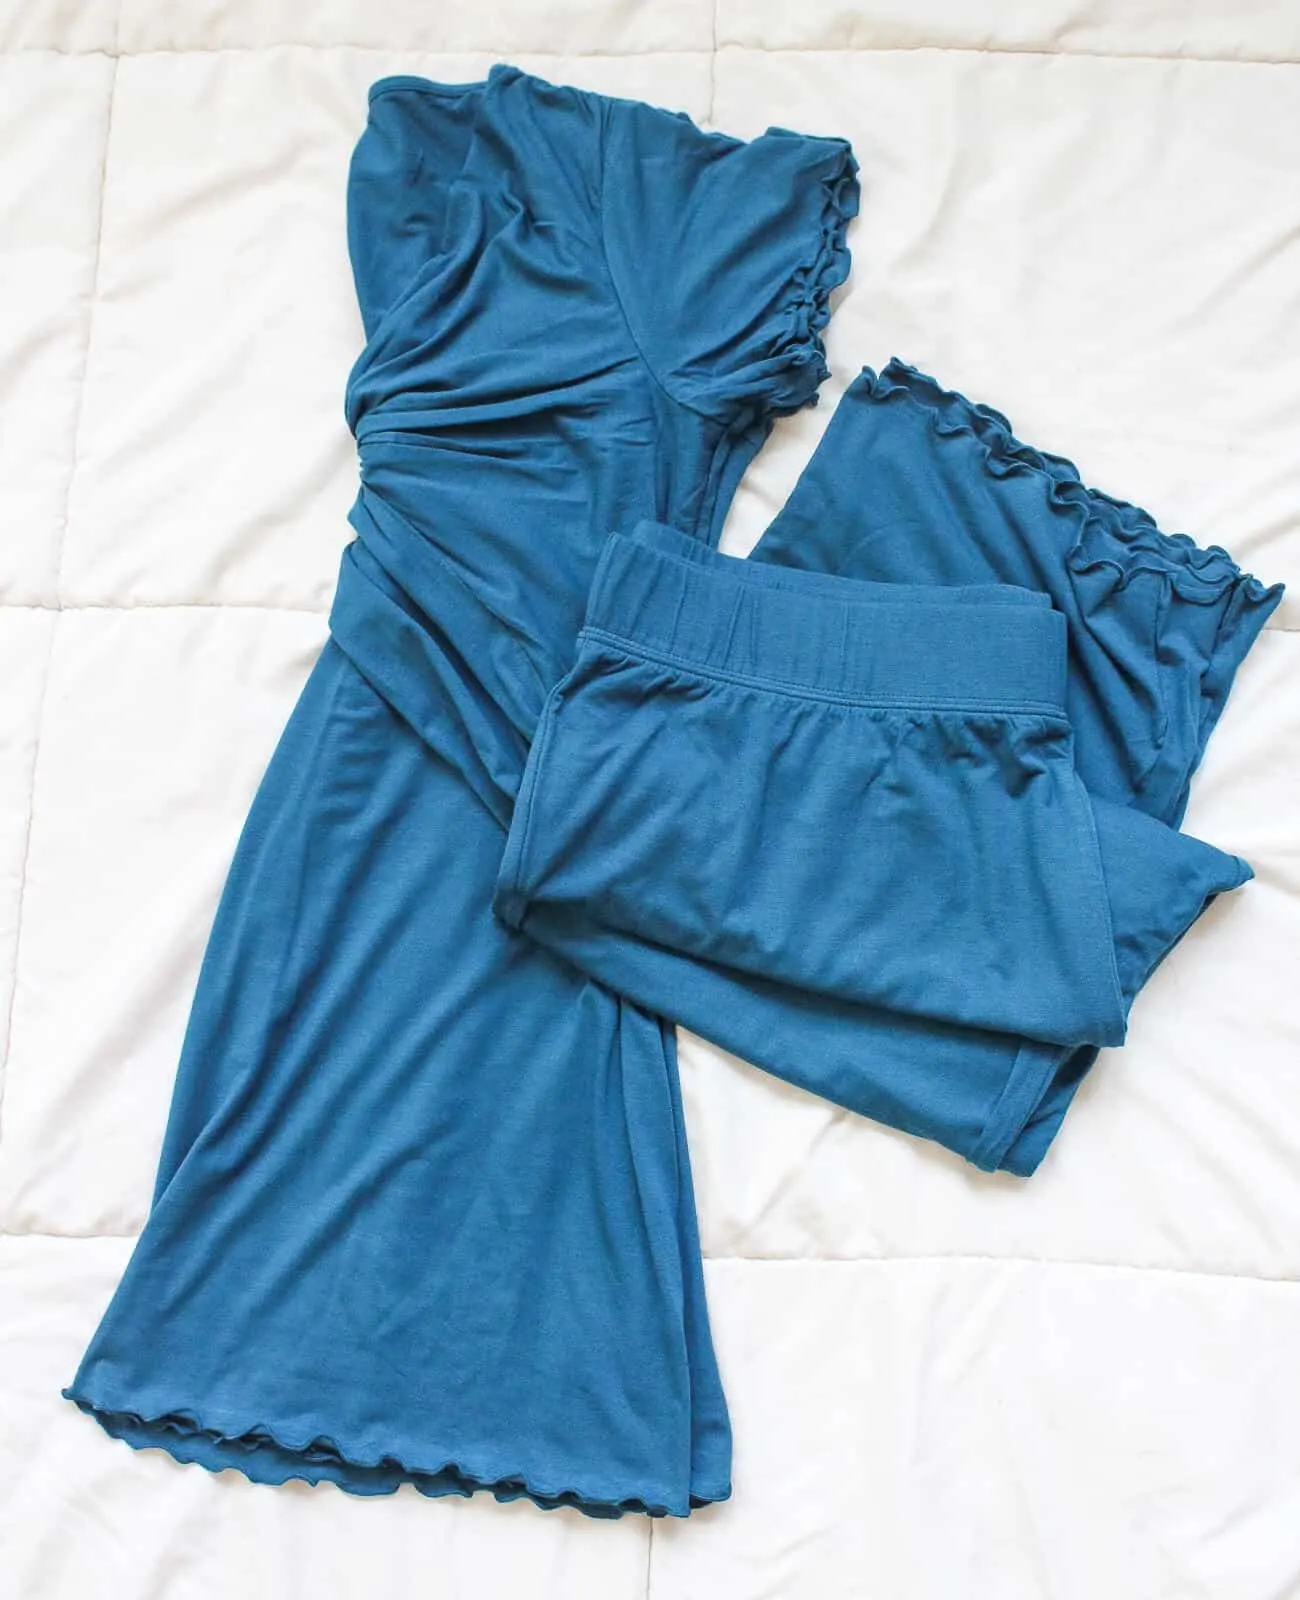 Blue clothing set to be warn in hospital after baby delivery.